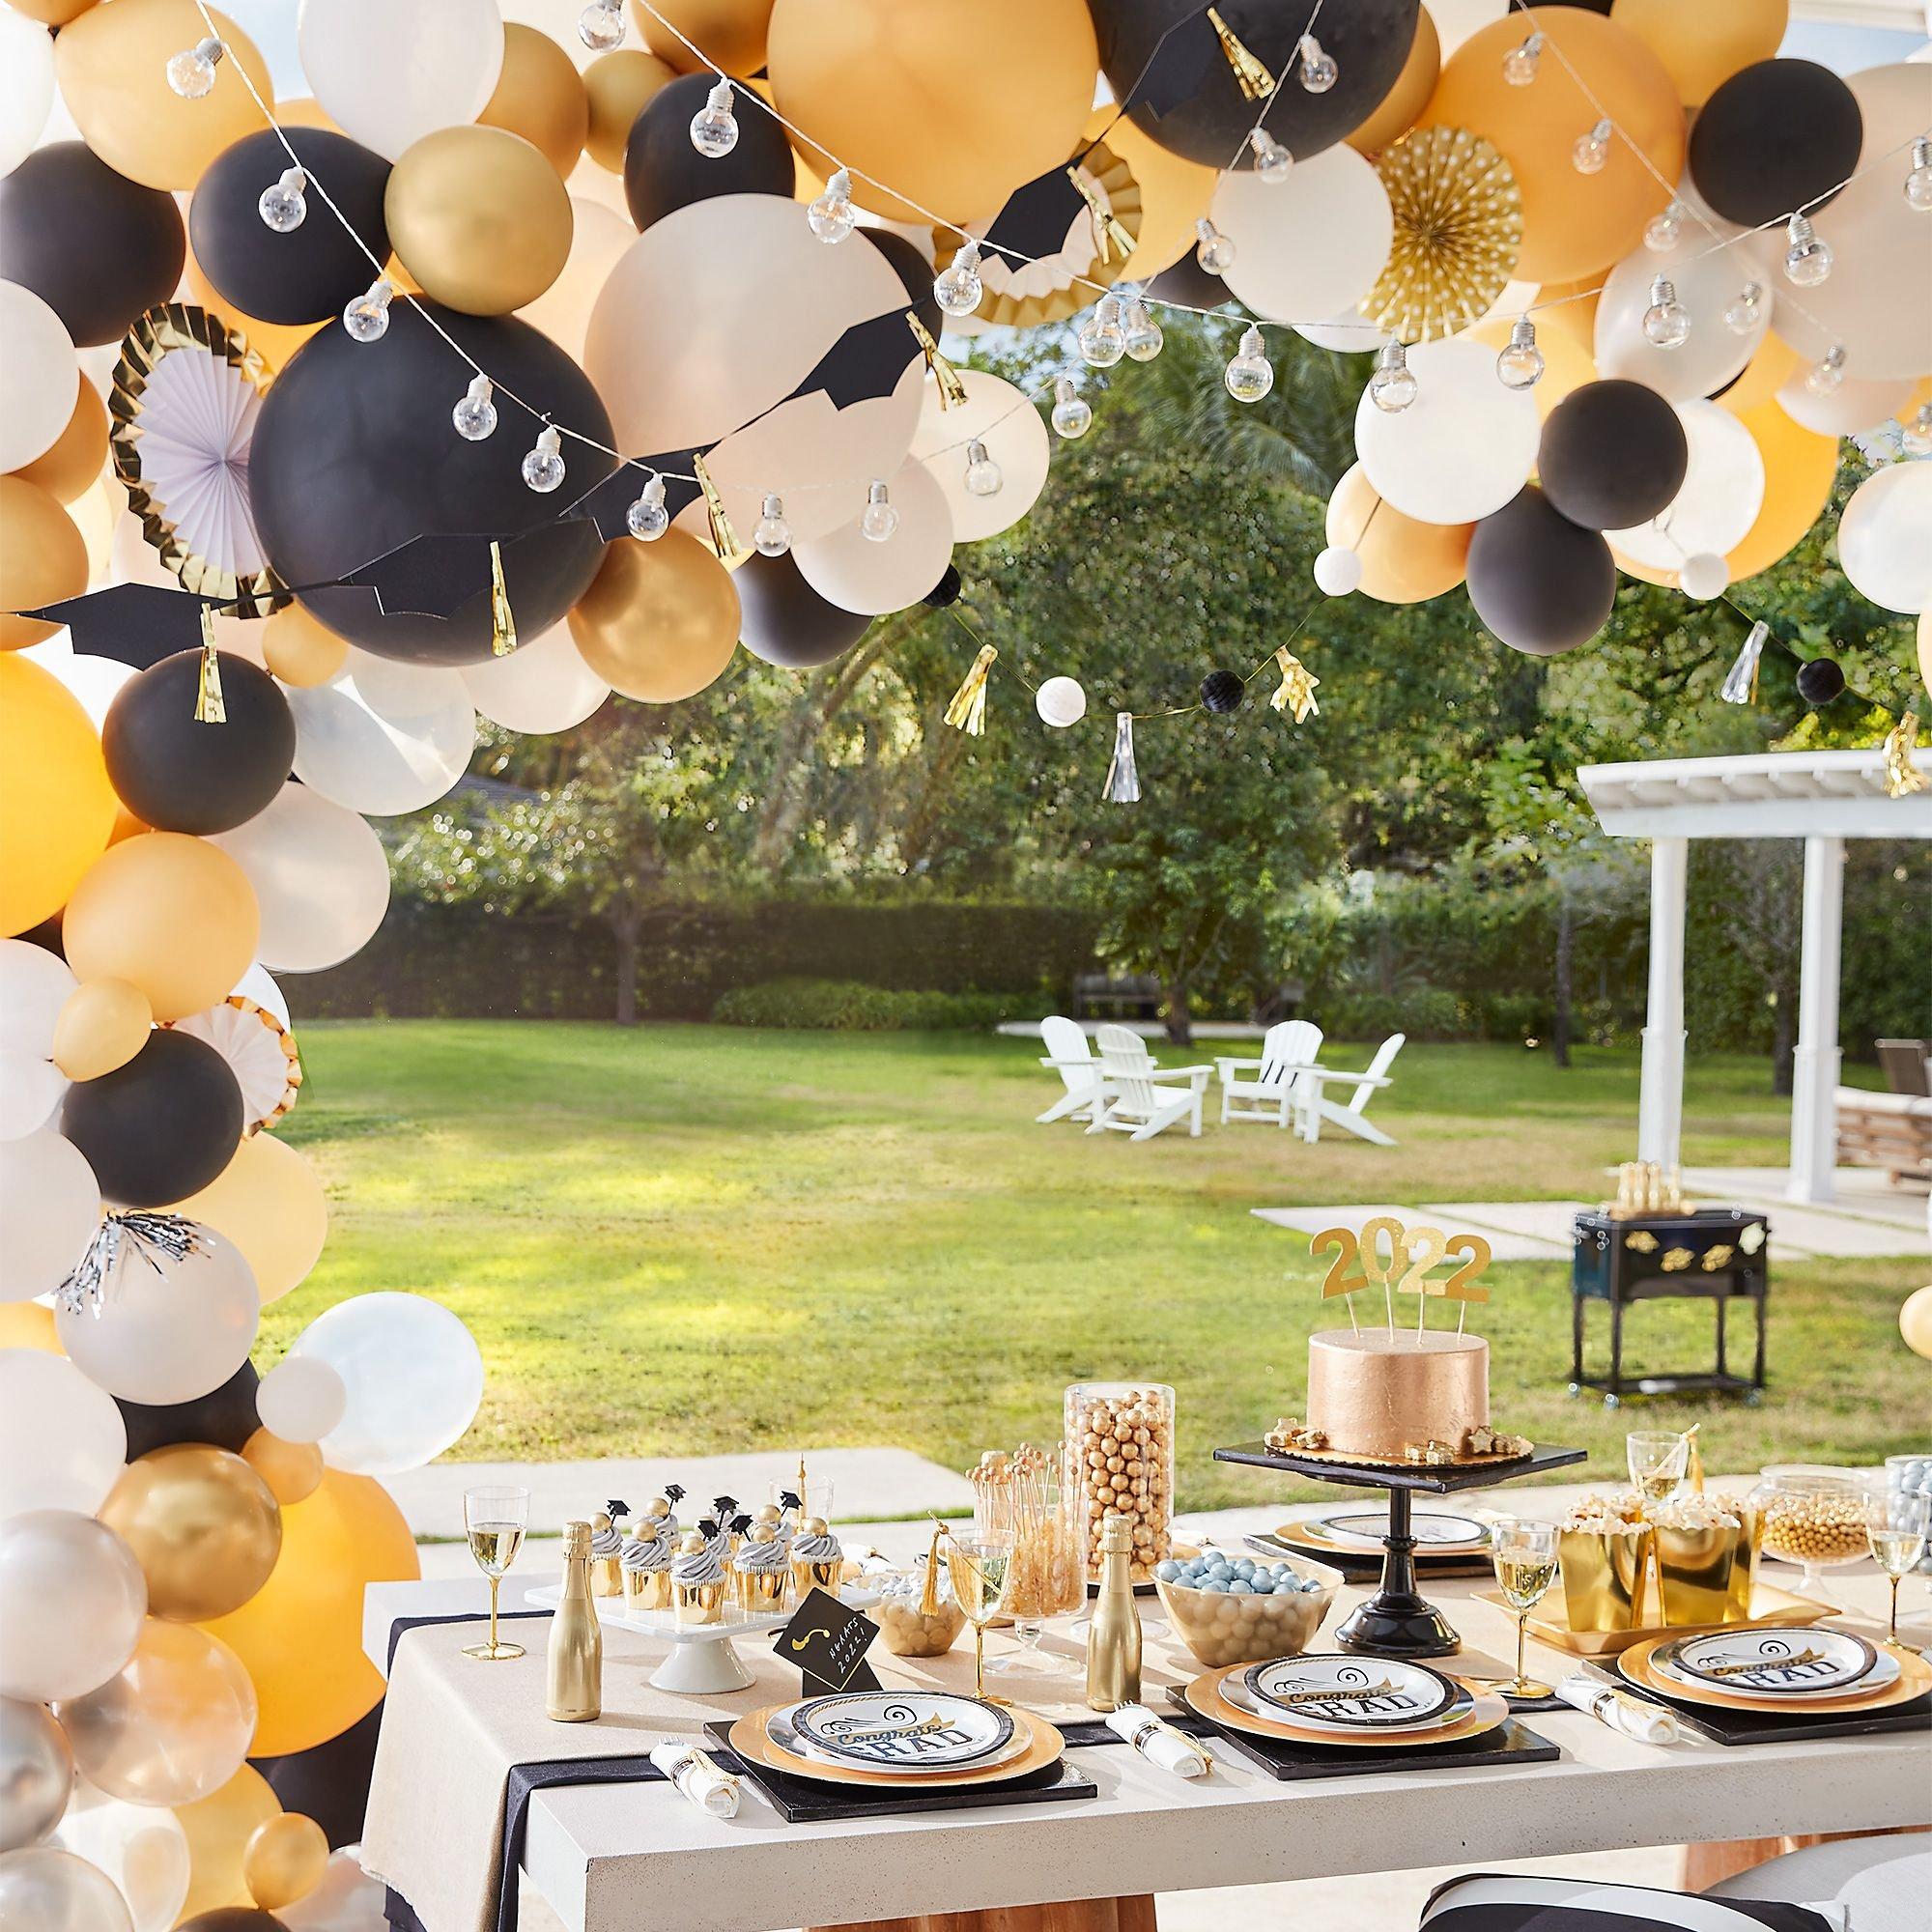 Black and Gold Table Decorations for 100th Birthday Party